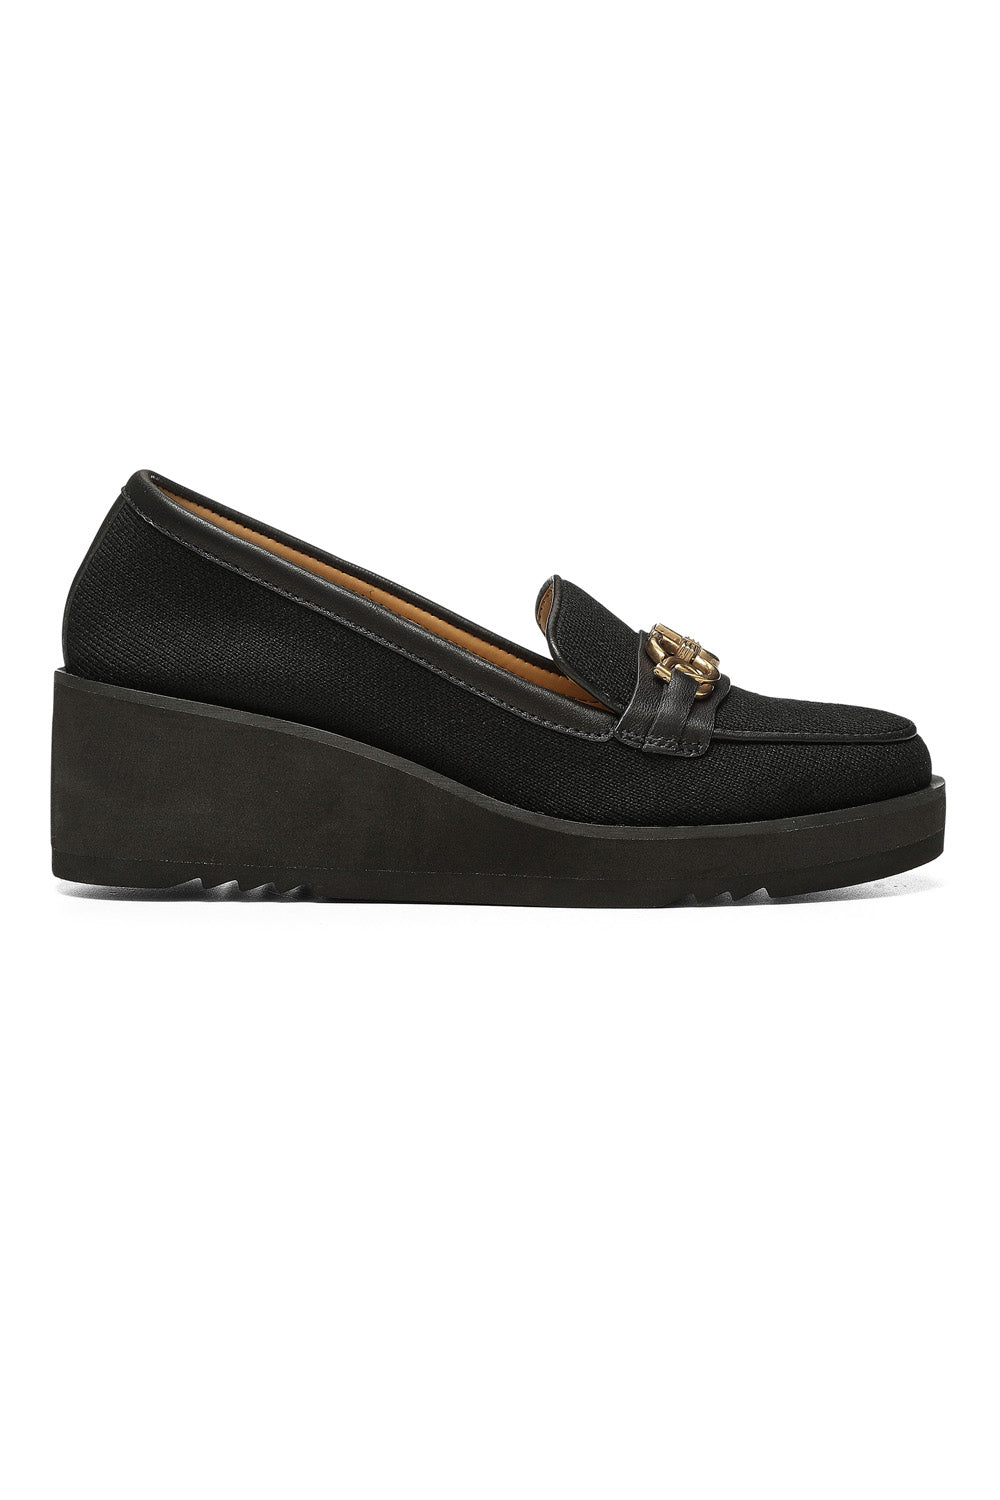 NYDJ Edward Wedge Loafers In Knit Fabric - Black